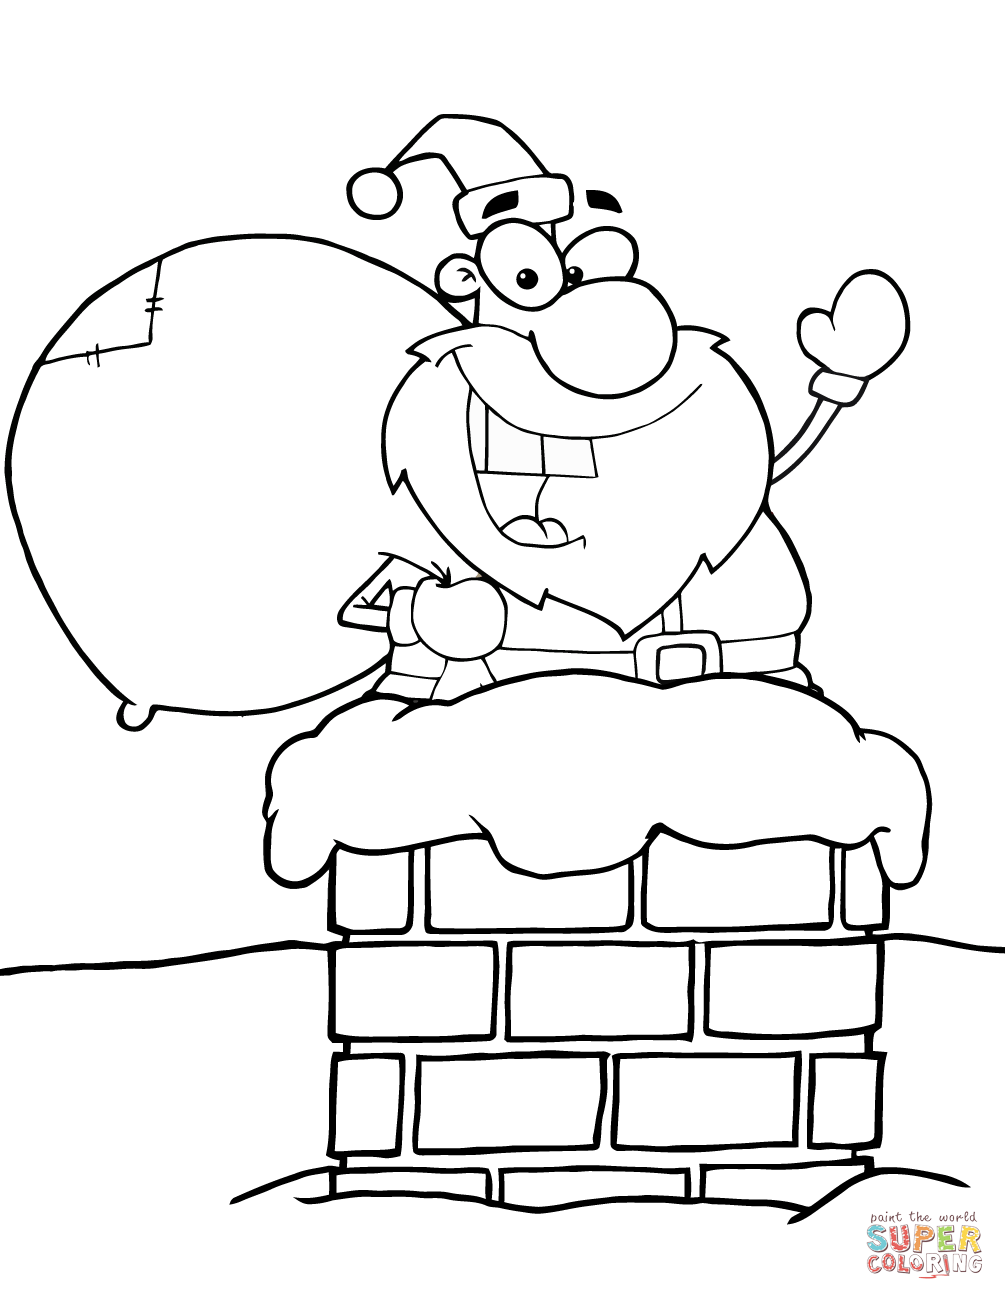 Chimney coloring #11, Download drawings